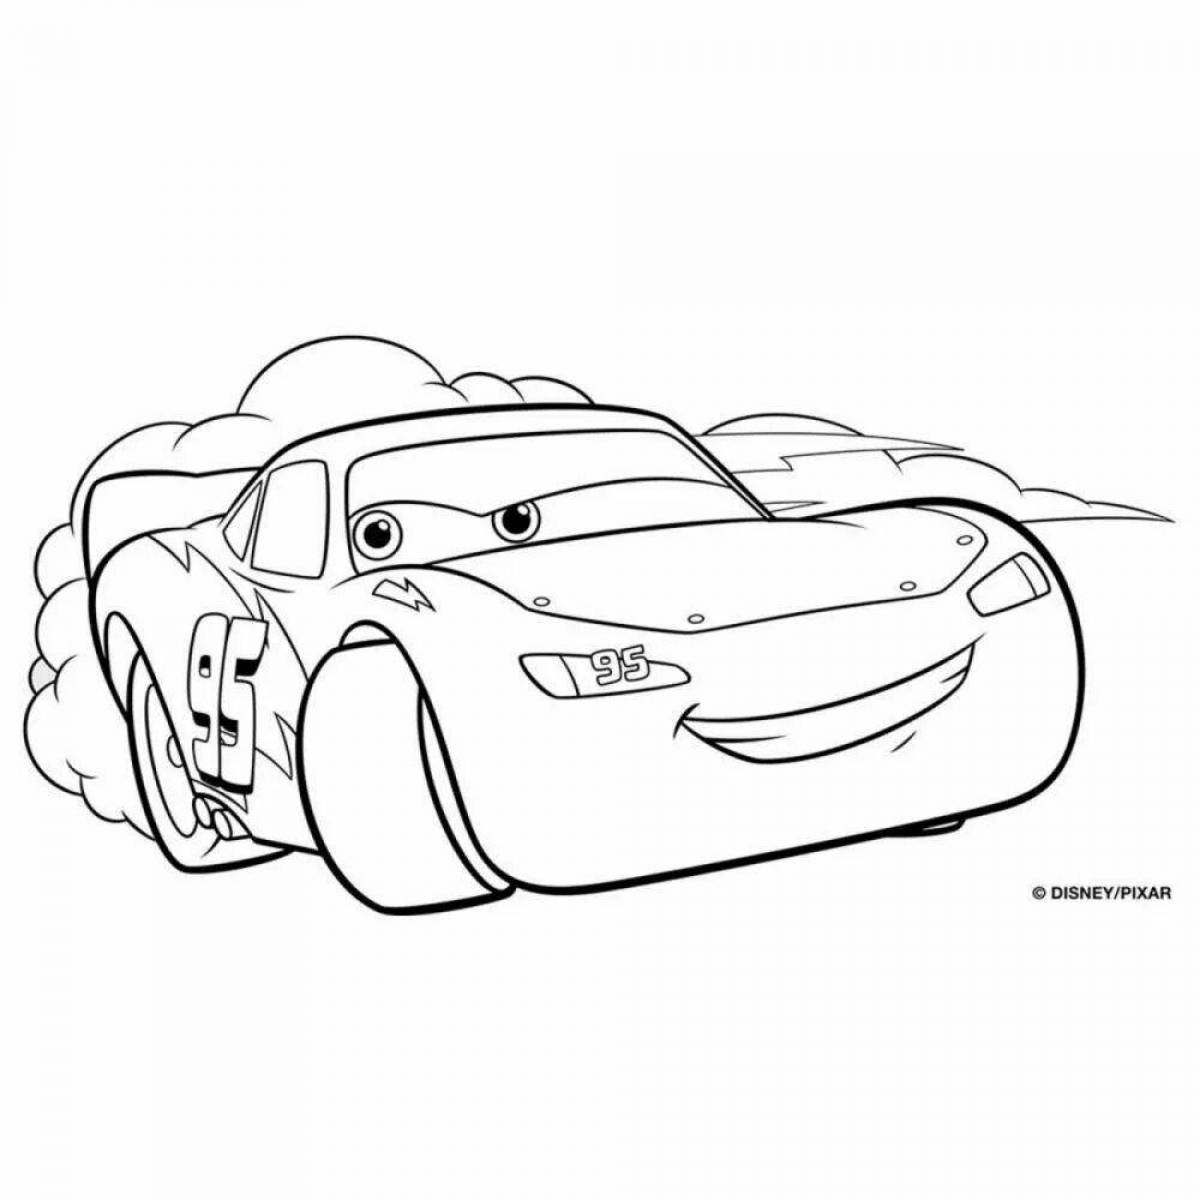 Sweet McQueen coloring page